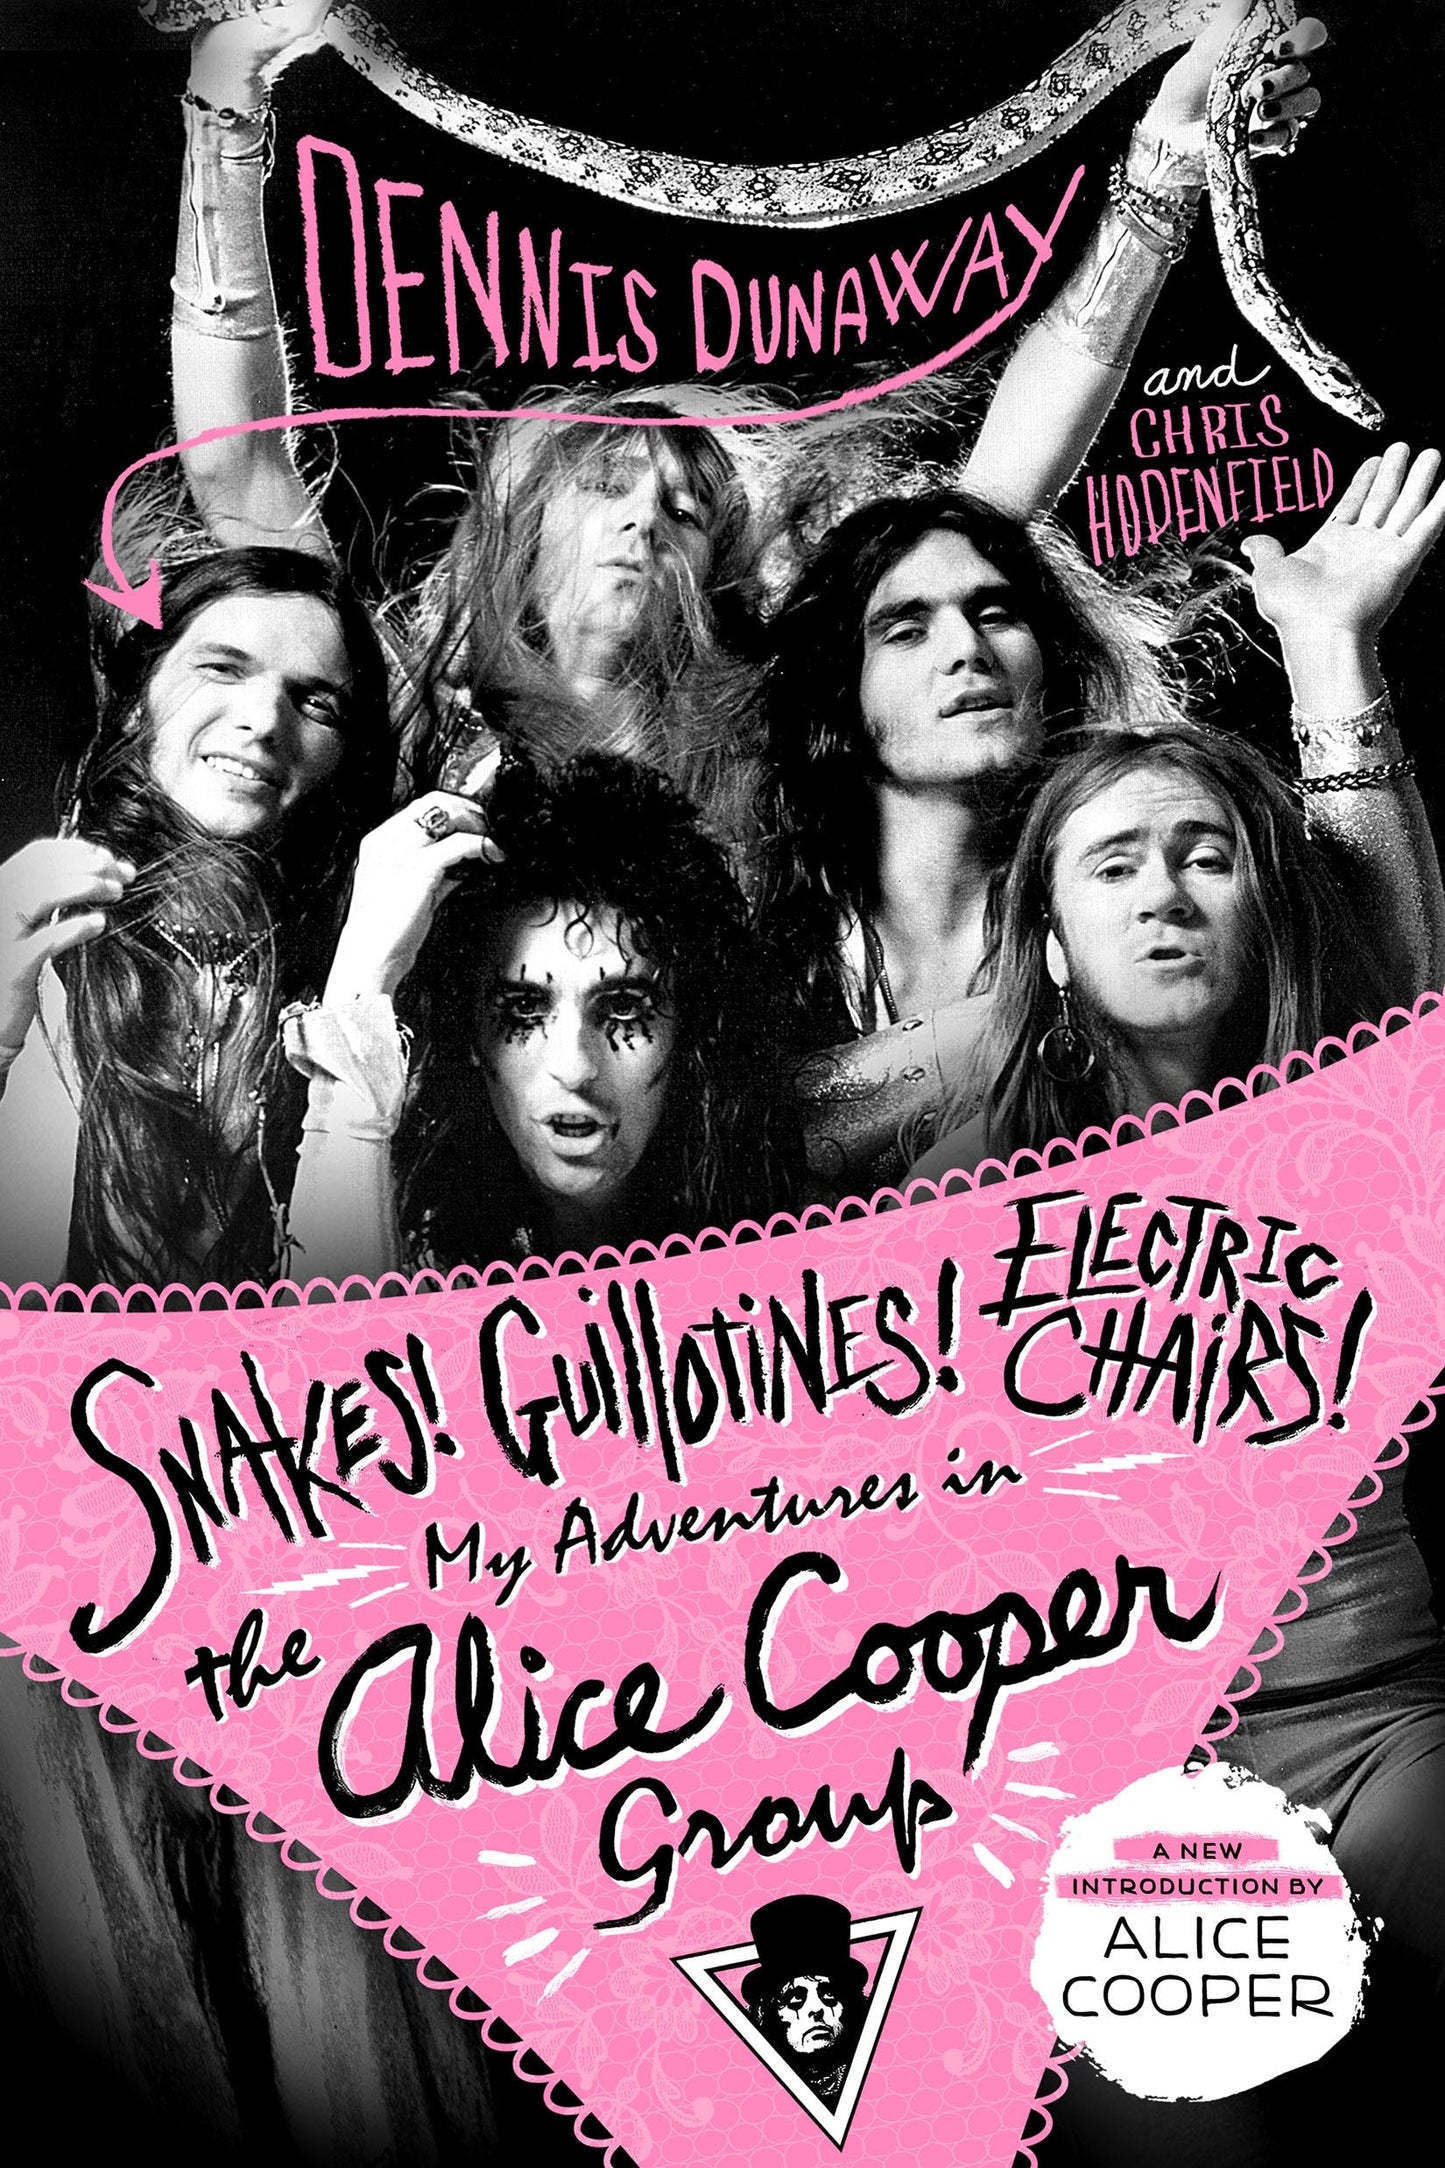 ALICE COOPER GROUP - SNAKES! GUILLOTINES! ELECTRIC CHAIRS!: MY ADVENTURES IN THE ALICE COOPER GROUP - PAPERBACK BOOK